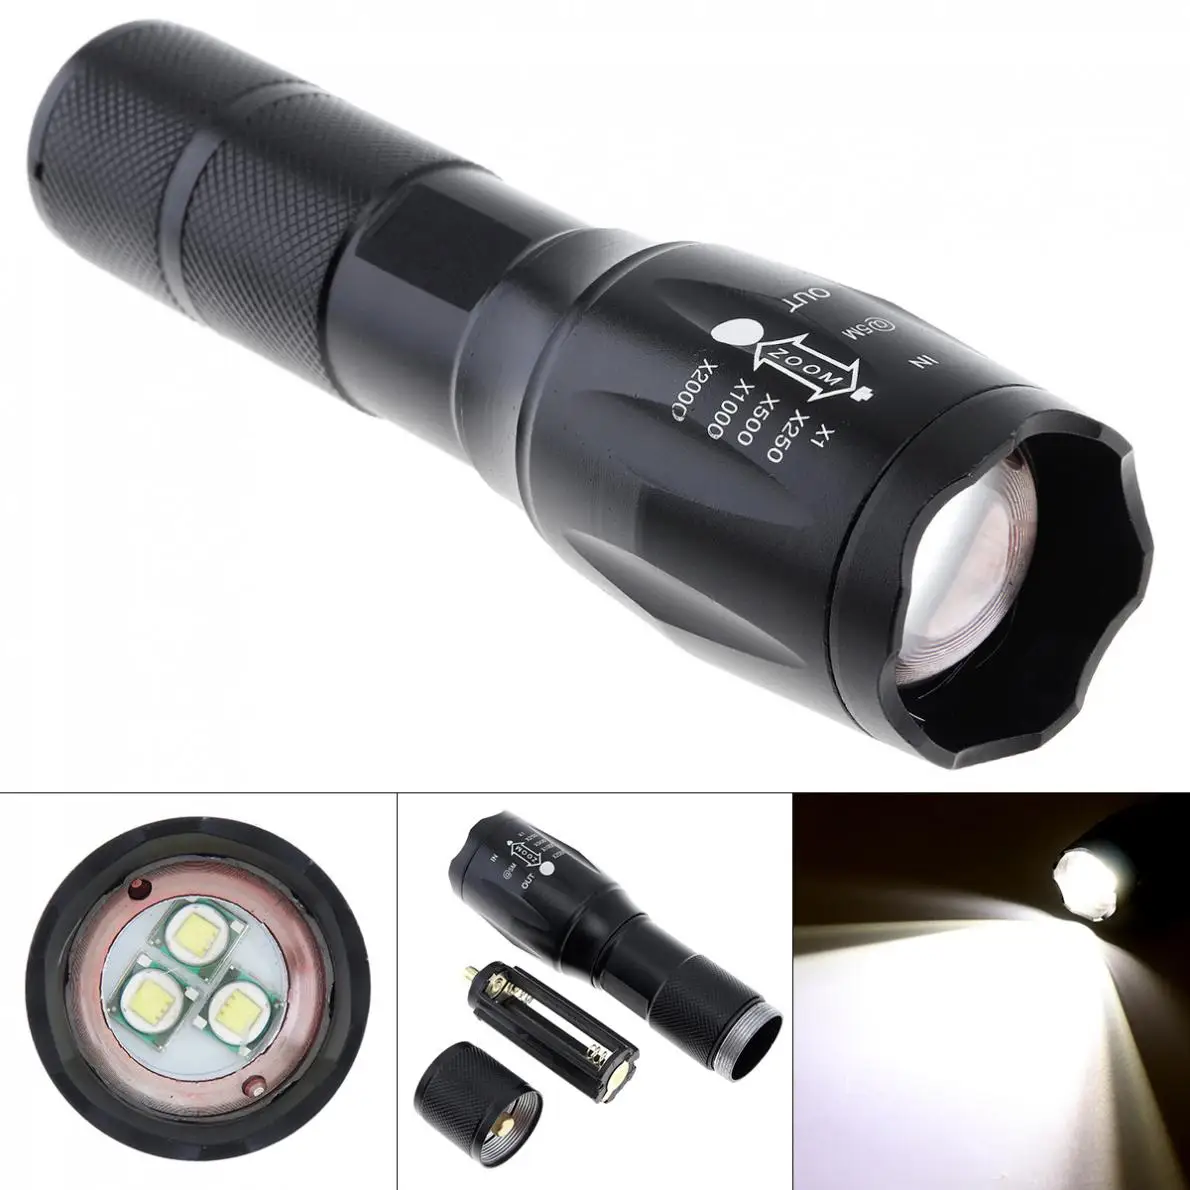 

3 XML-T6 LED 3000LM 5 Modes Lights Telescopic Zoom Mini Black Strong Flashlight with 300M Range Support One 18650 Battery